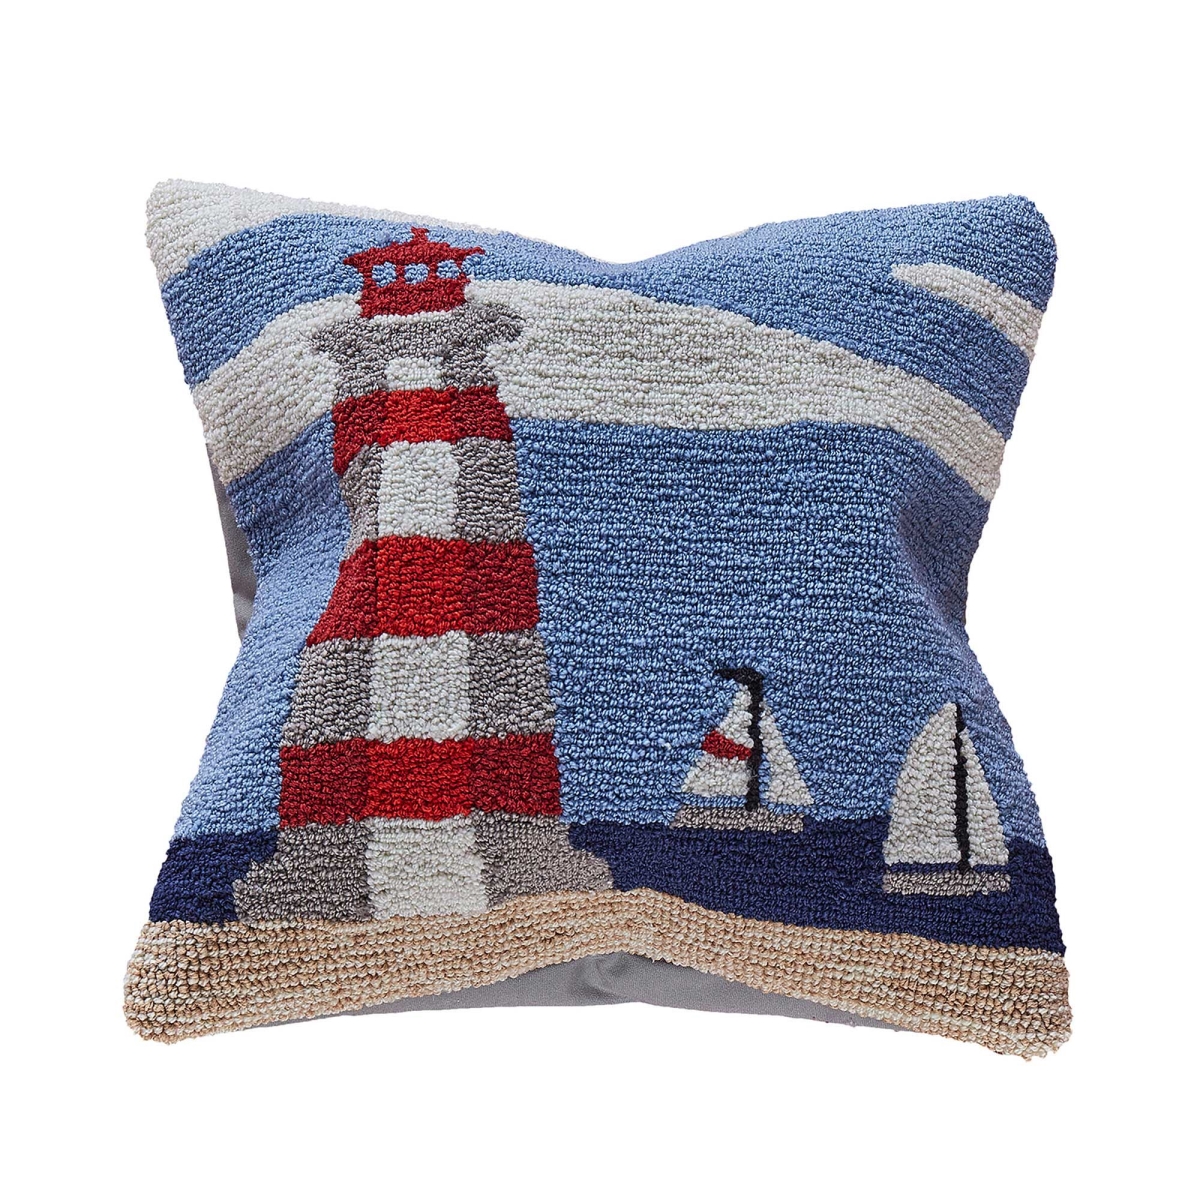 Trans-ocean Imports 7fp8s439703 18 In. Square Liora Manne Frontporch Lighthouse Indoor & Outdoor Pillow - Sky